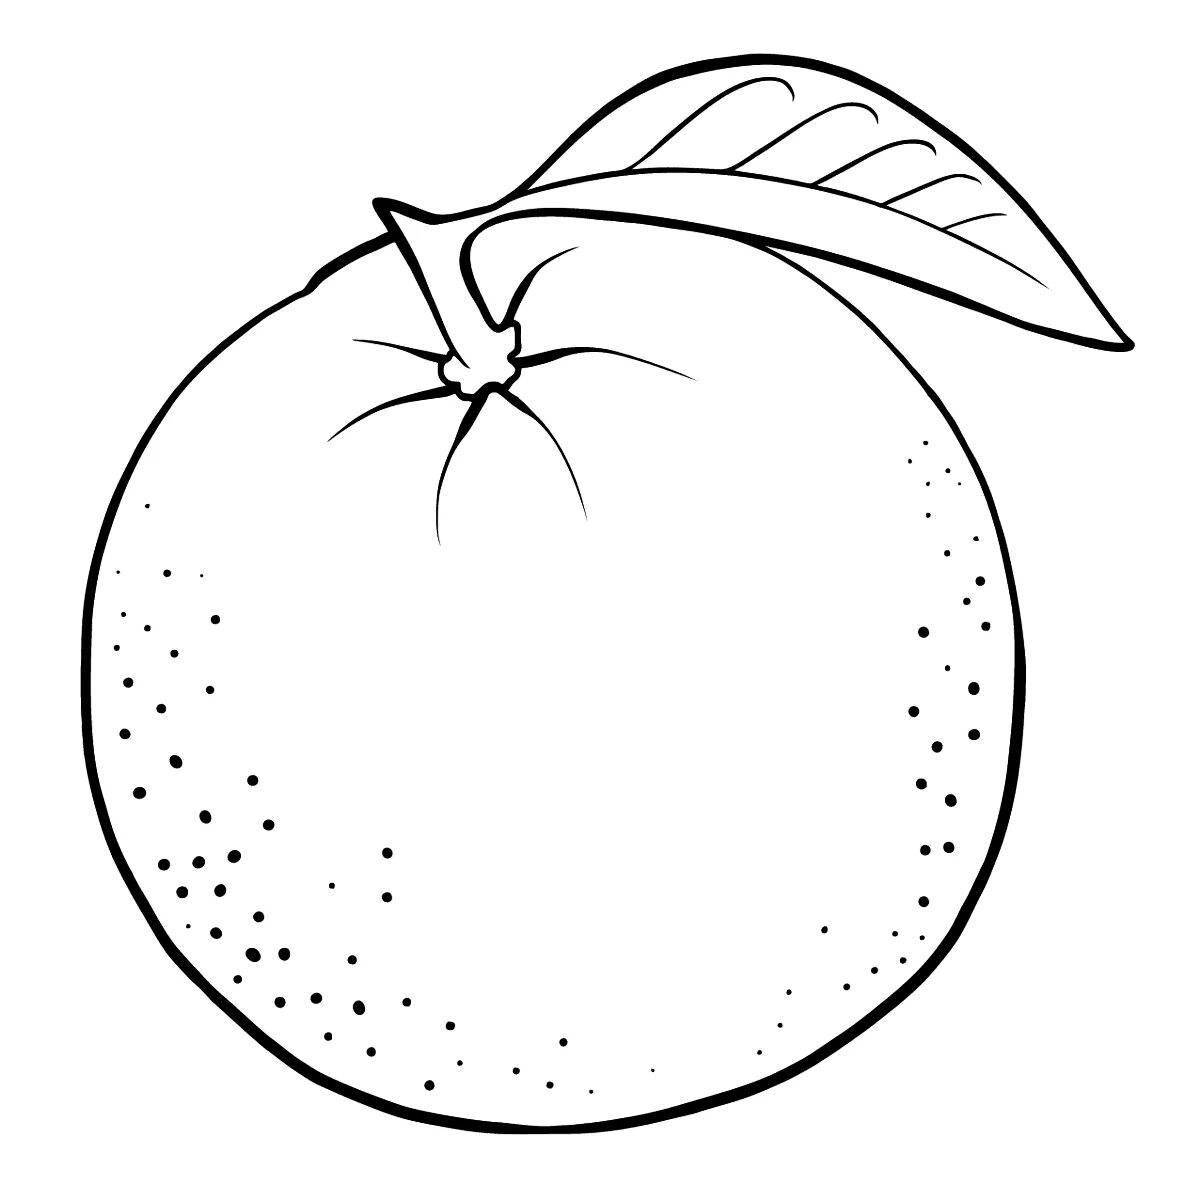 Rampant tangerines and oranges coloring page